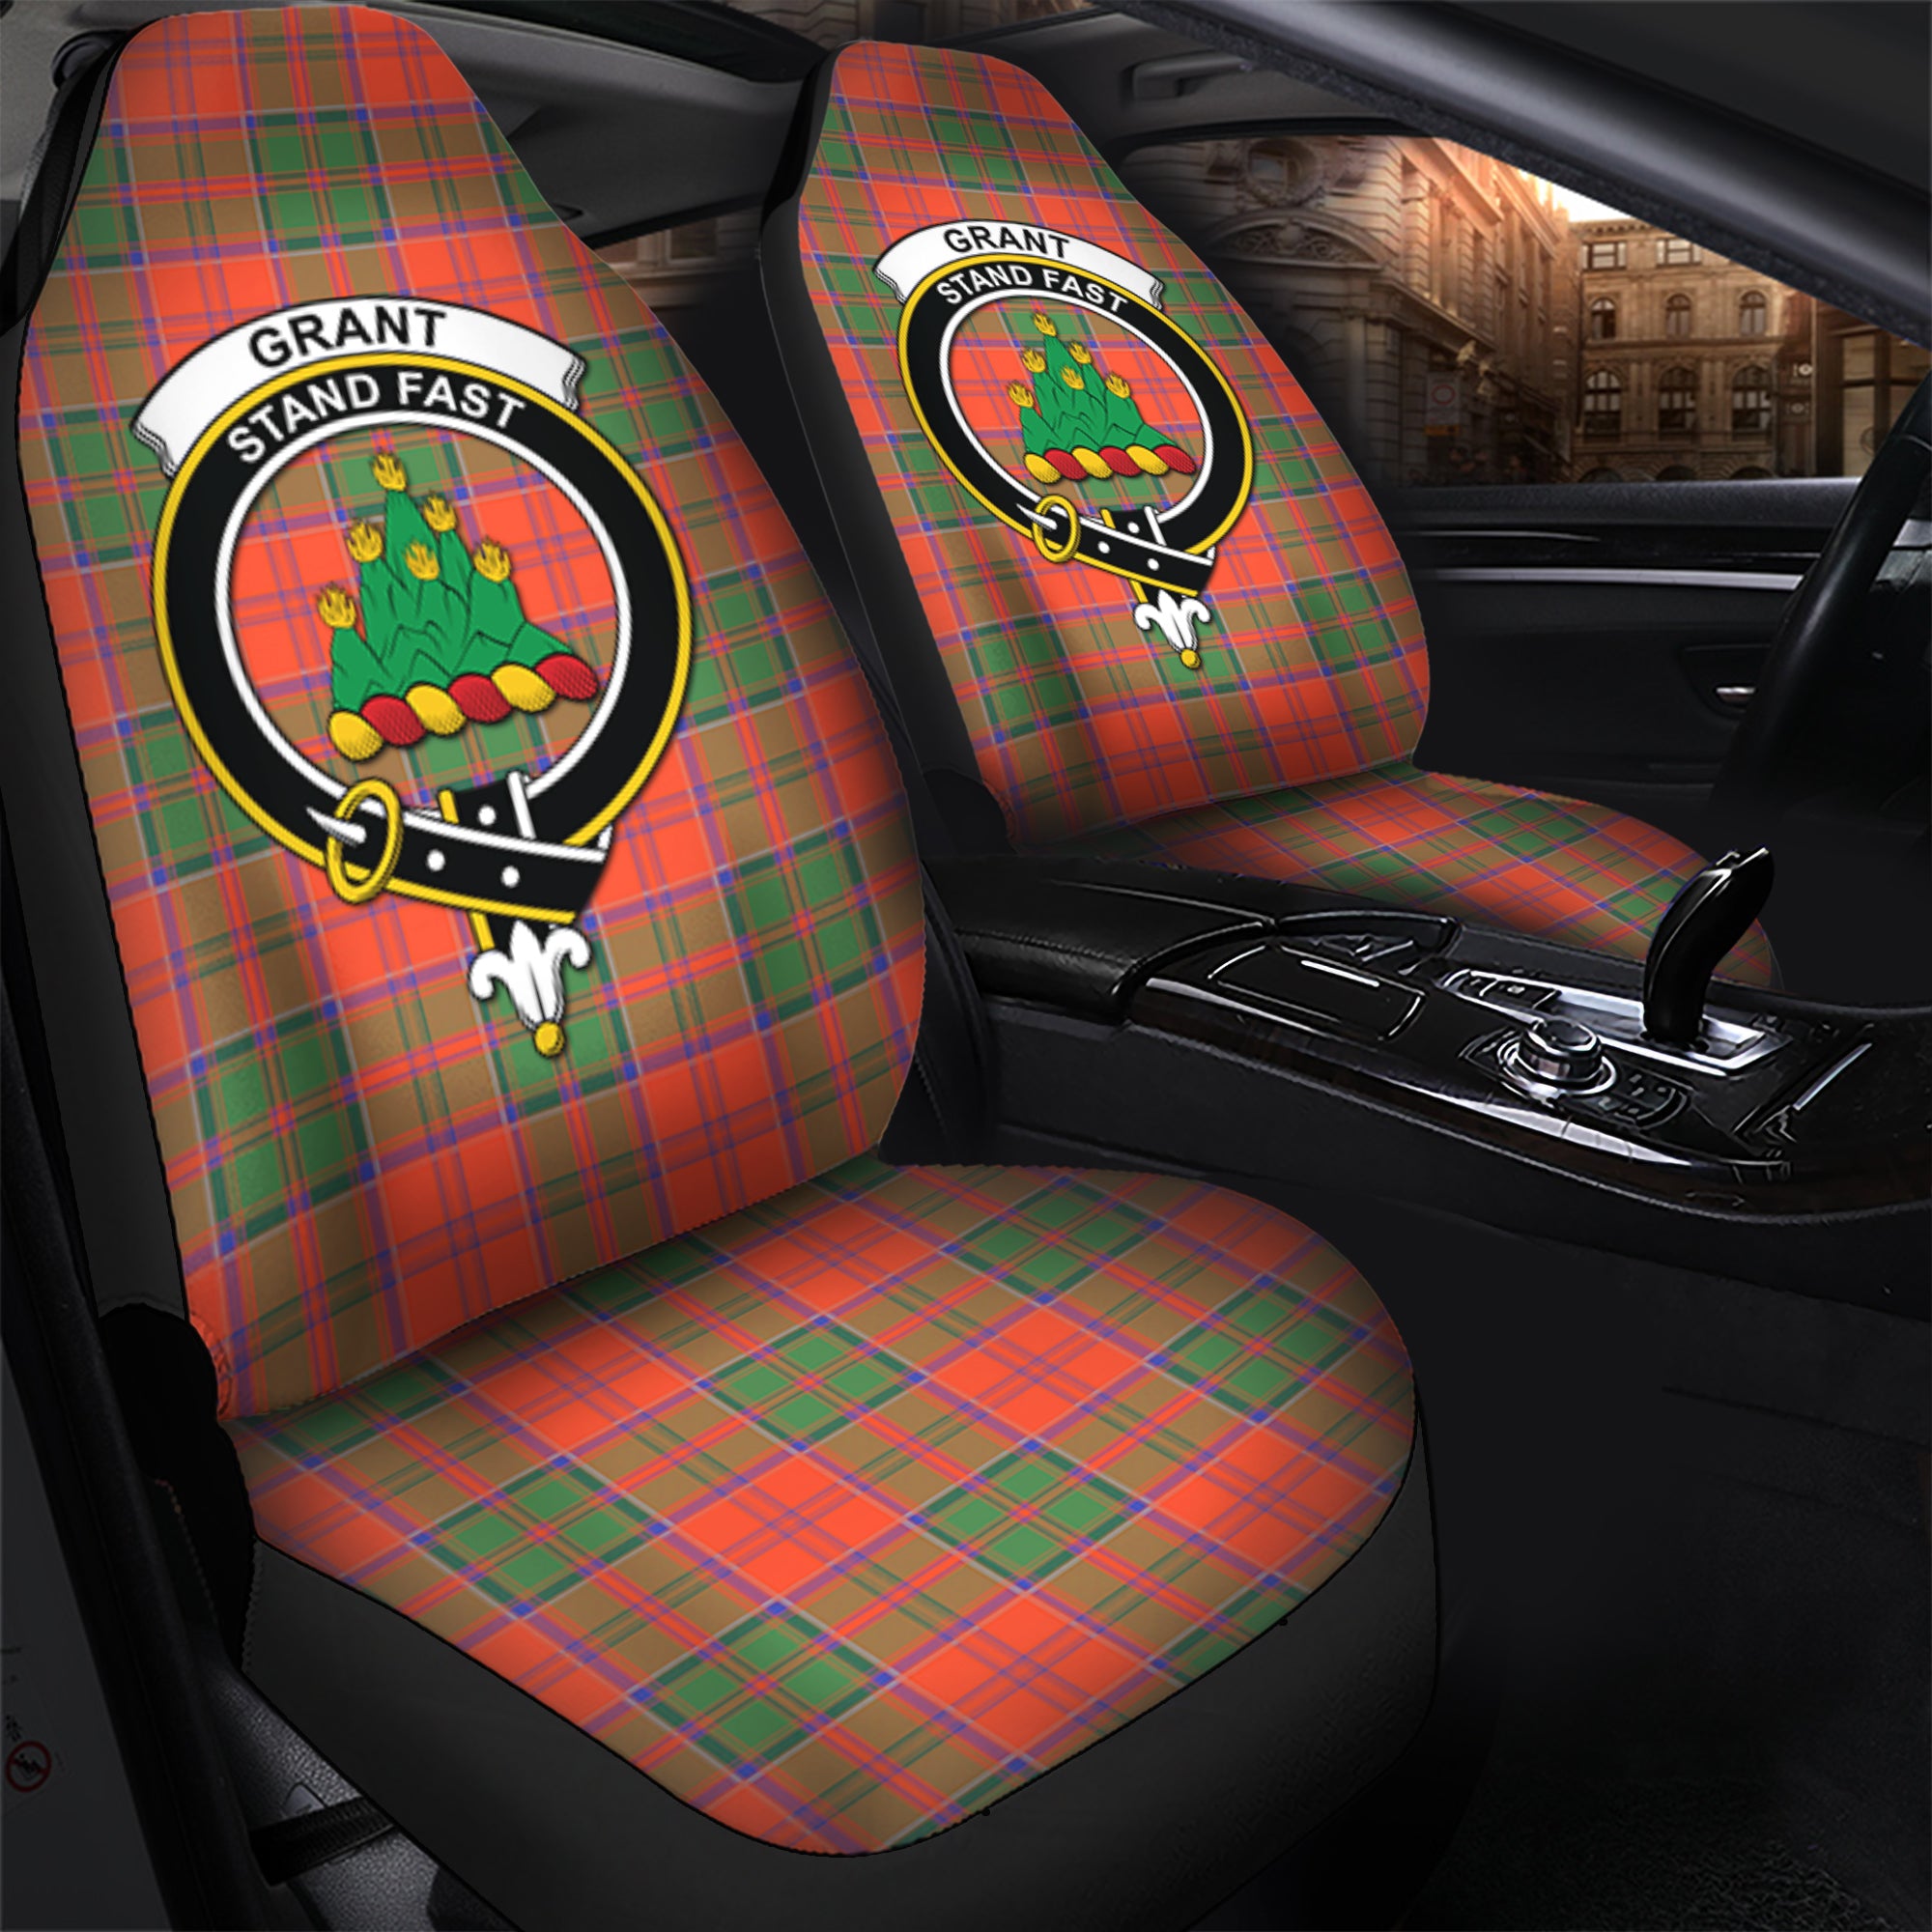 Grant Ancient Clan Tartan Car Seat Cover, Family Crest Tartan Seat Cover TS23